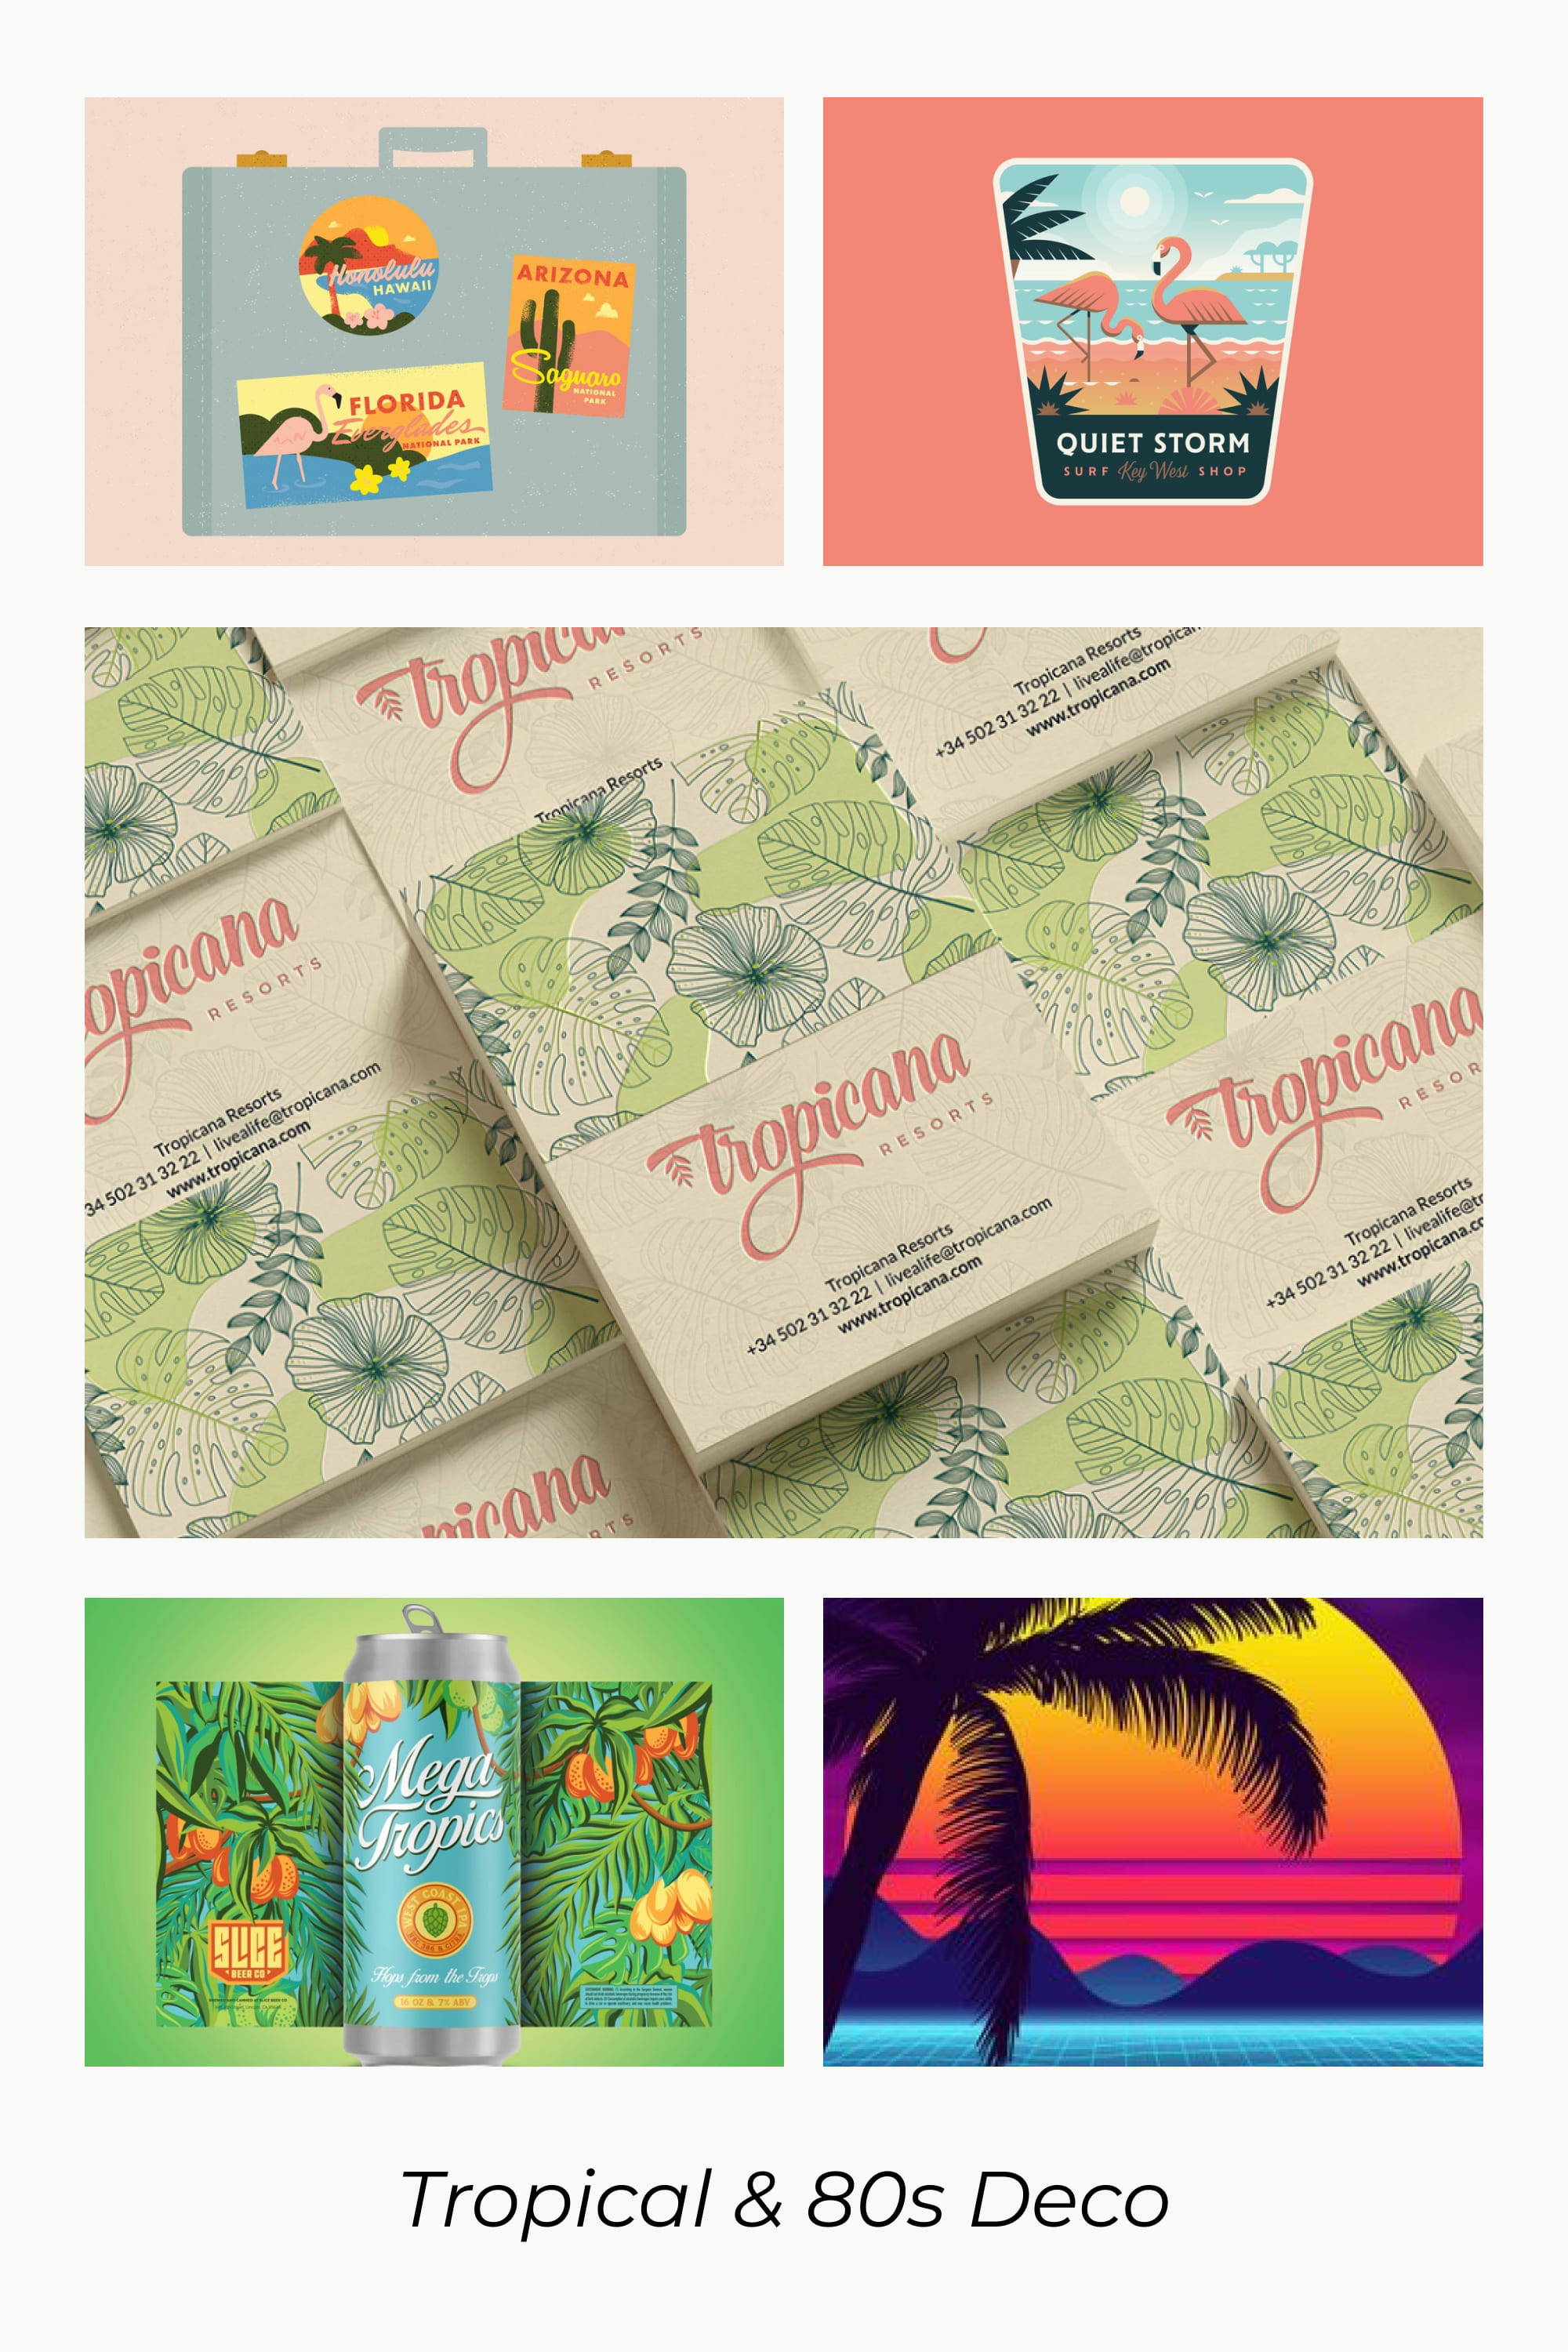 Collage of images in tropical style.